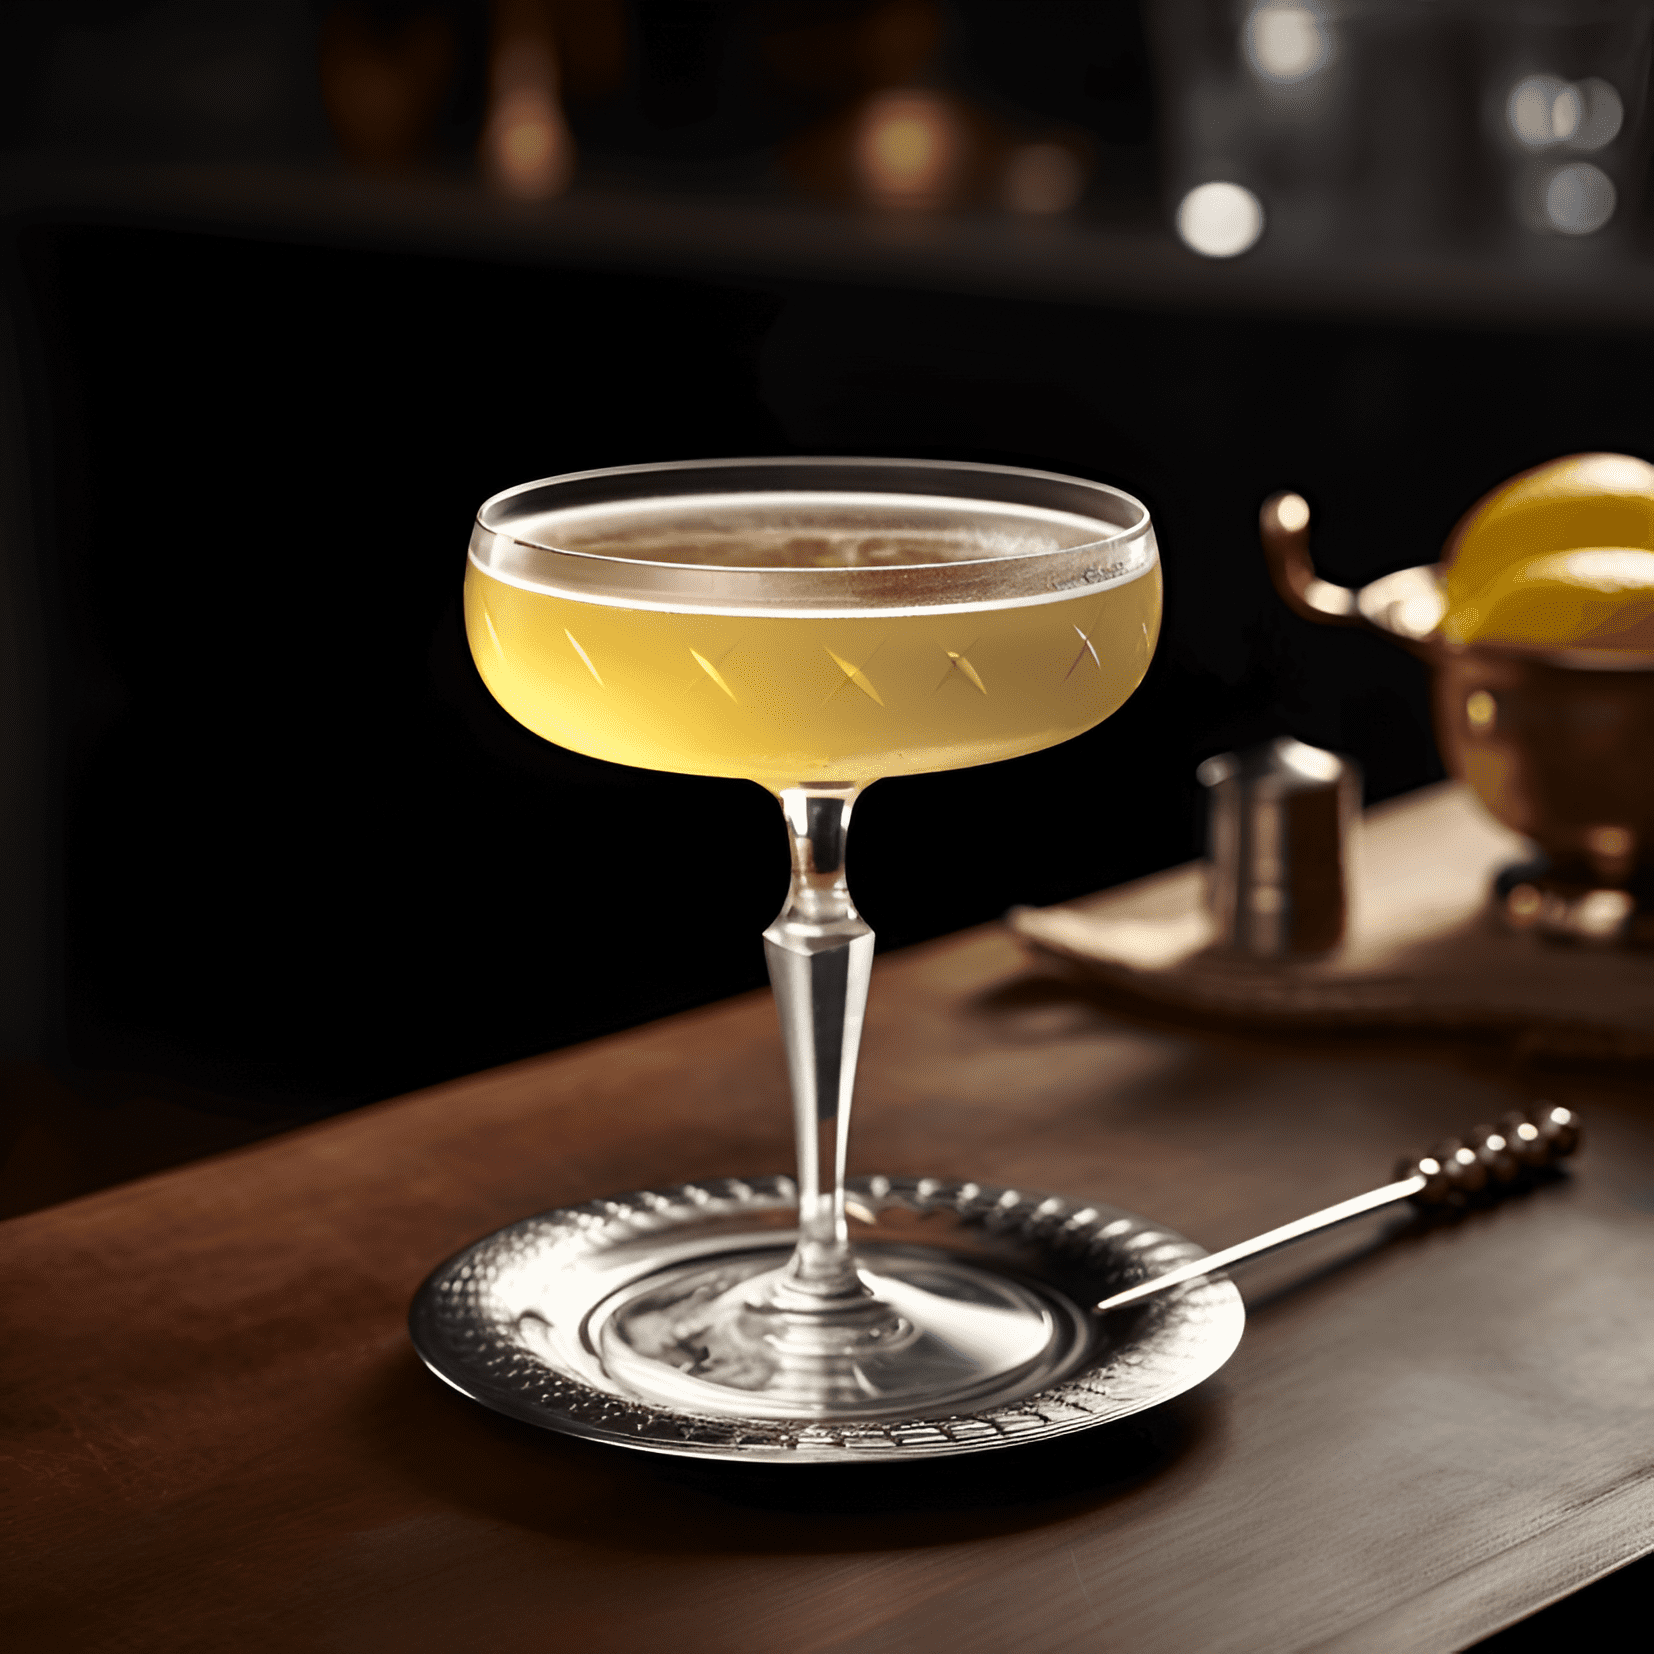 Prohibition Cocktail Recipe - The Prohibition cocktail has a complex flavor profile, with a mix of sweet, sour, and bitter notes. The sweetness of the honey syrup is balanced by the tartness of the lemon juice, while the herbal notes of gin and orange liqueur add depth and sophistication.